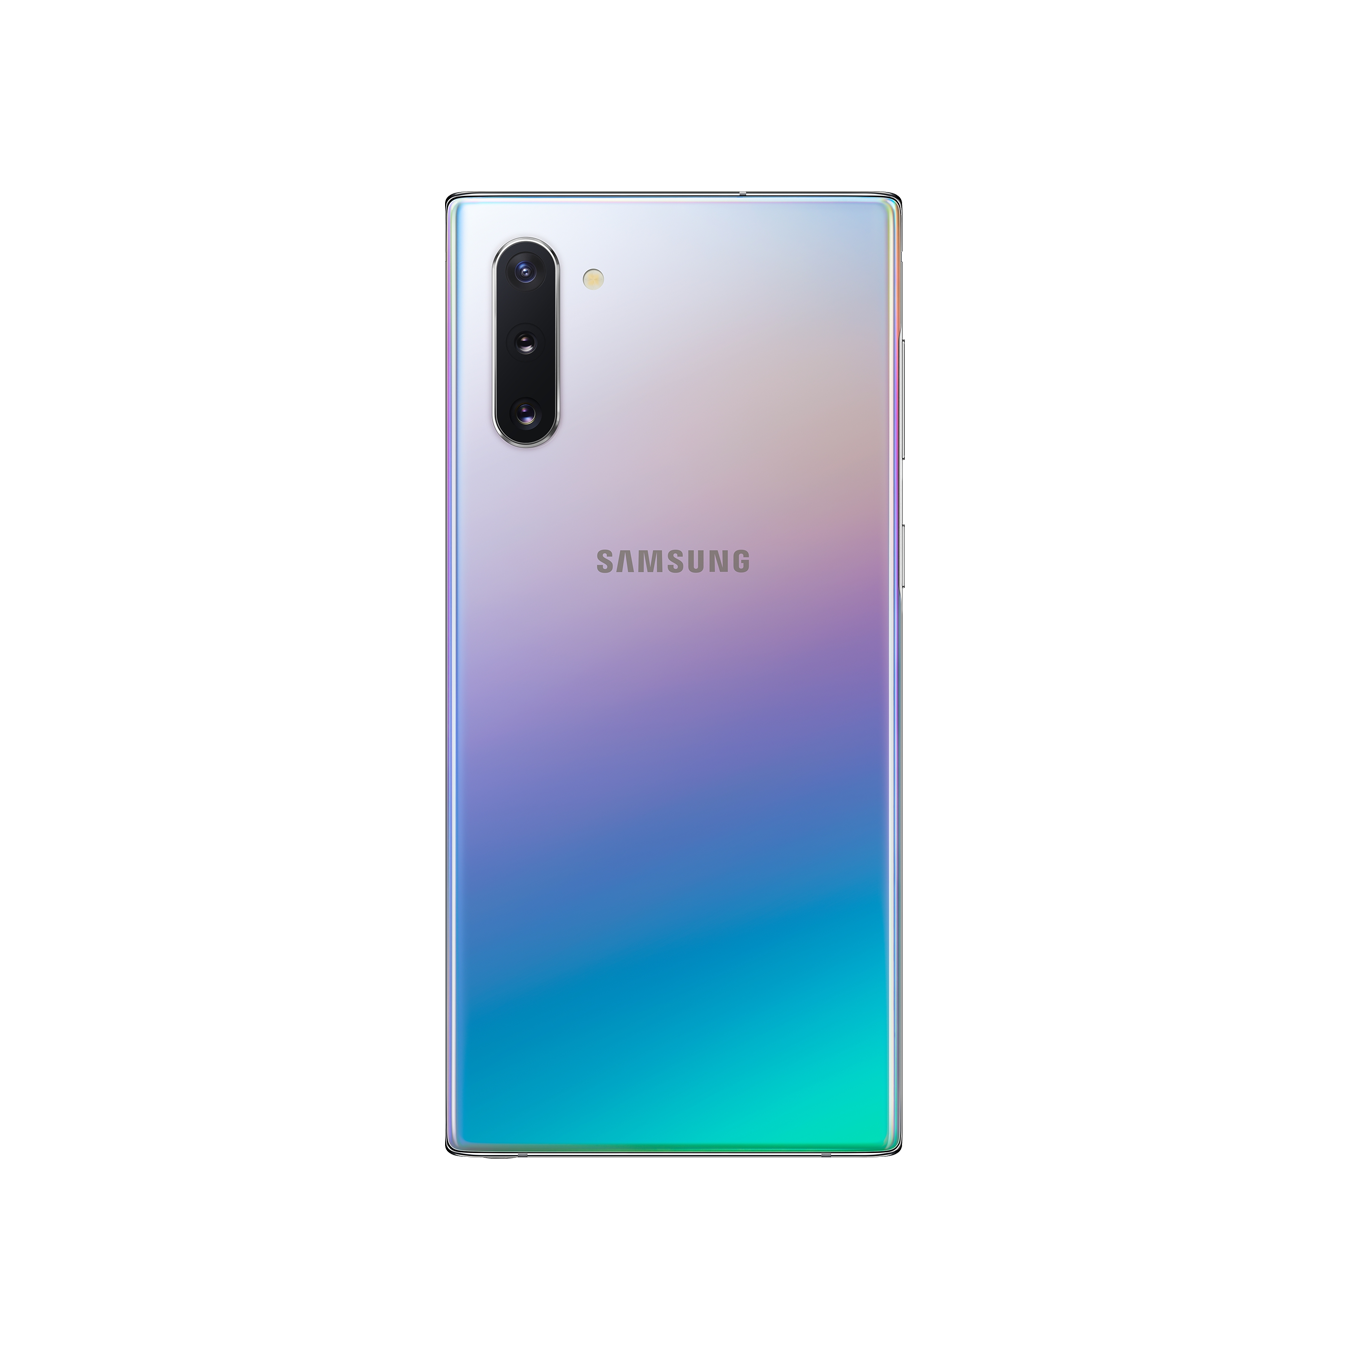 Samsung Galaxy Note10 IMEI repair service to fix bad or blacklisted IMEI, ensuring full functionality and connectivity, available at cleanimei.com